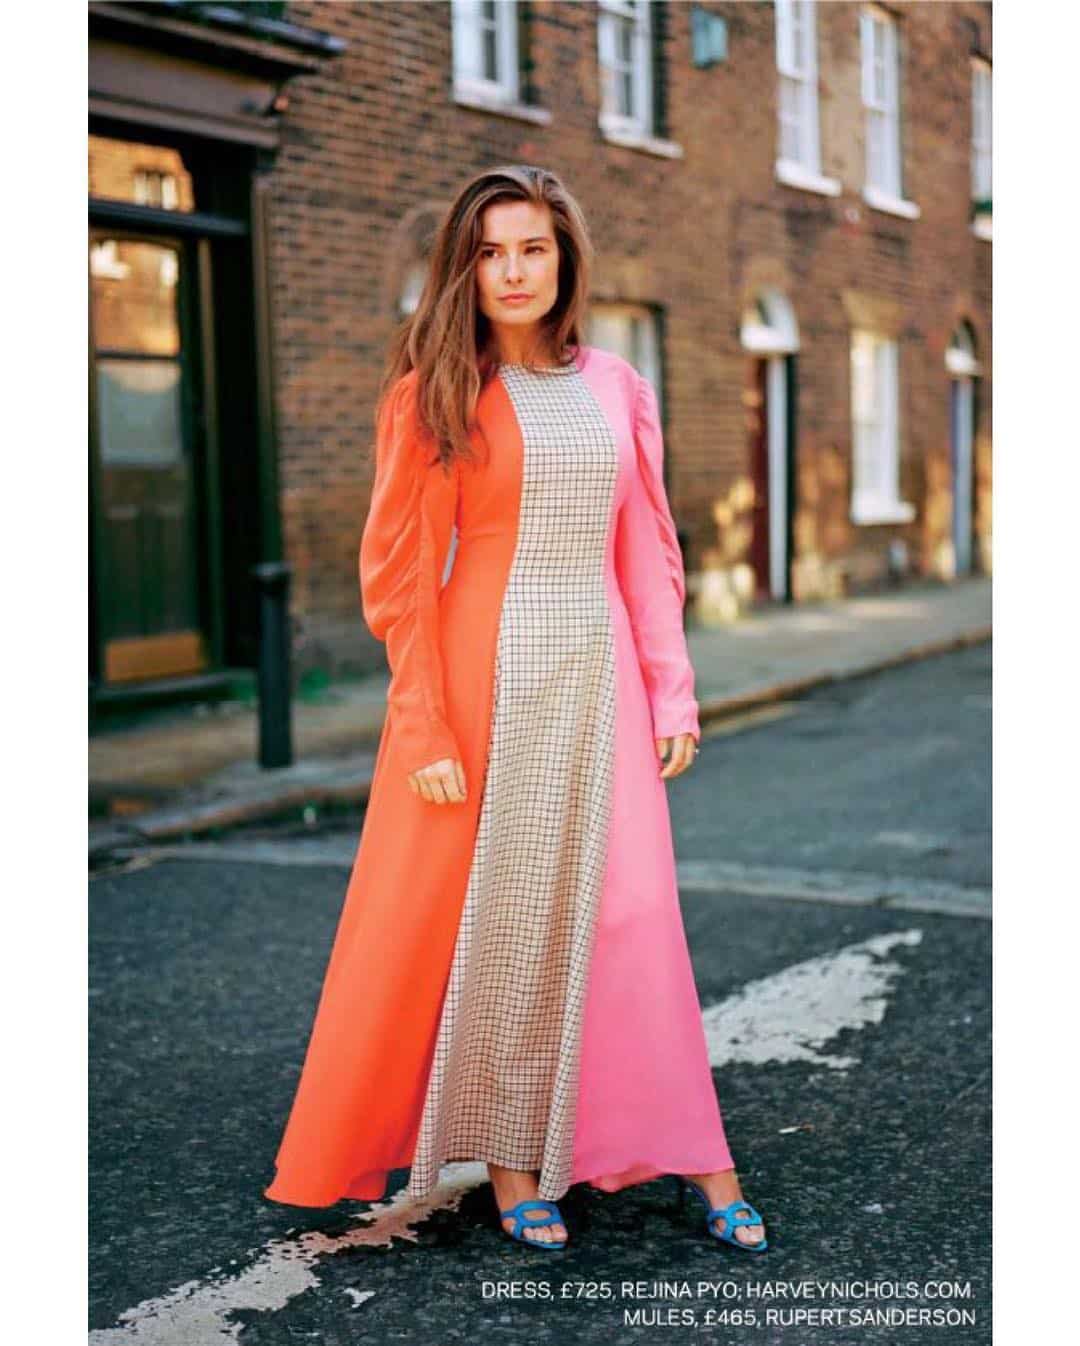 Oscar winner @rachelshenton featured in @theststyle discussing the hilarious new @bbctwo comedy White Gold and her Academy Award winning short film The Silent Child  .
.
.
.
.📸 @lilybw